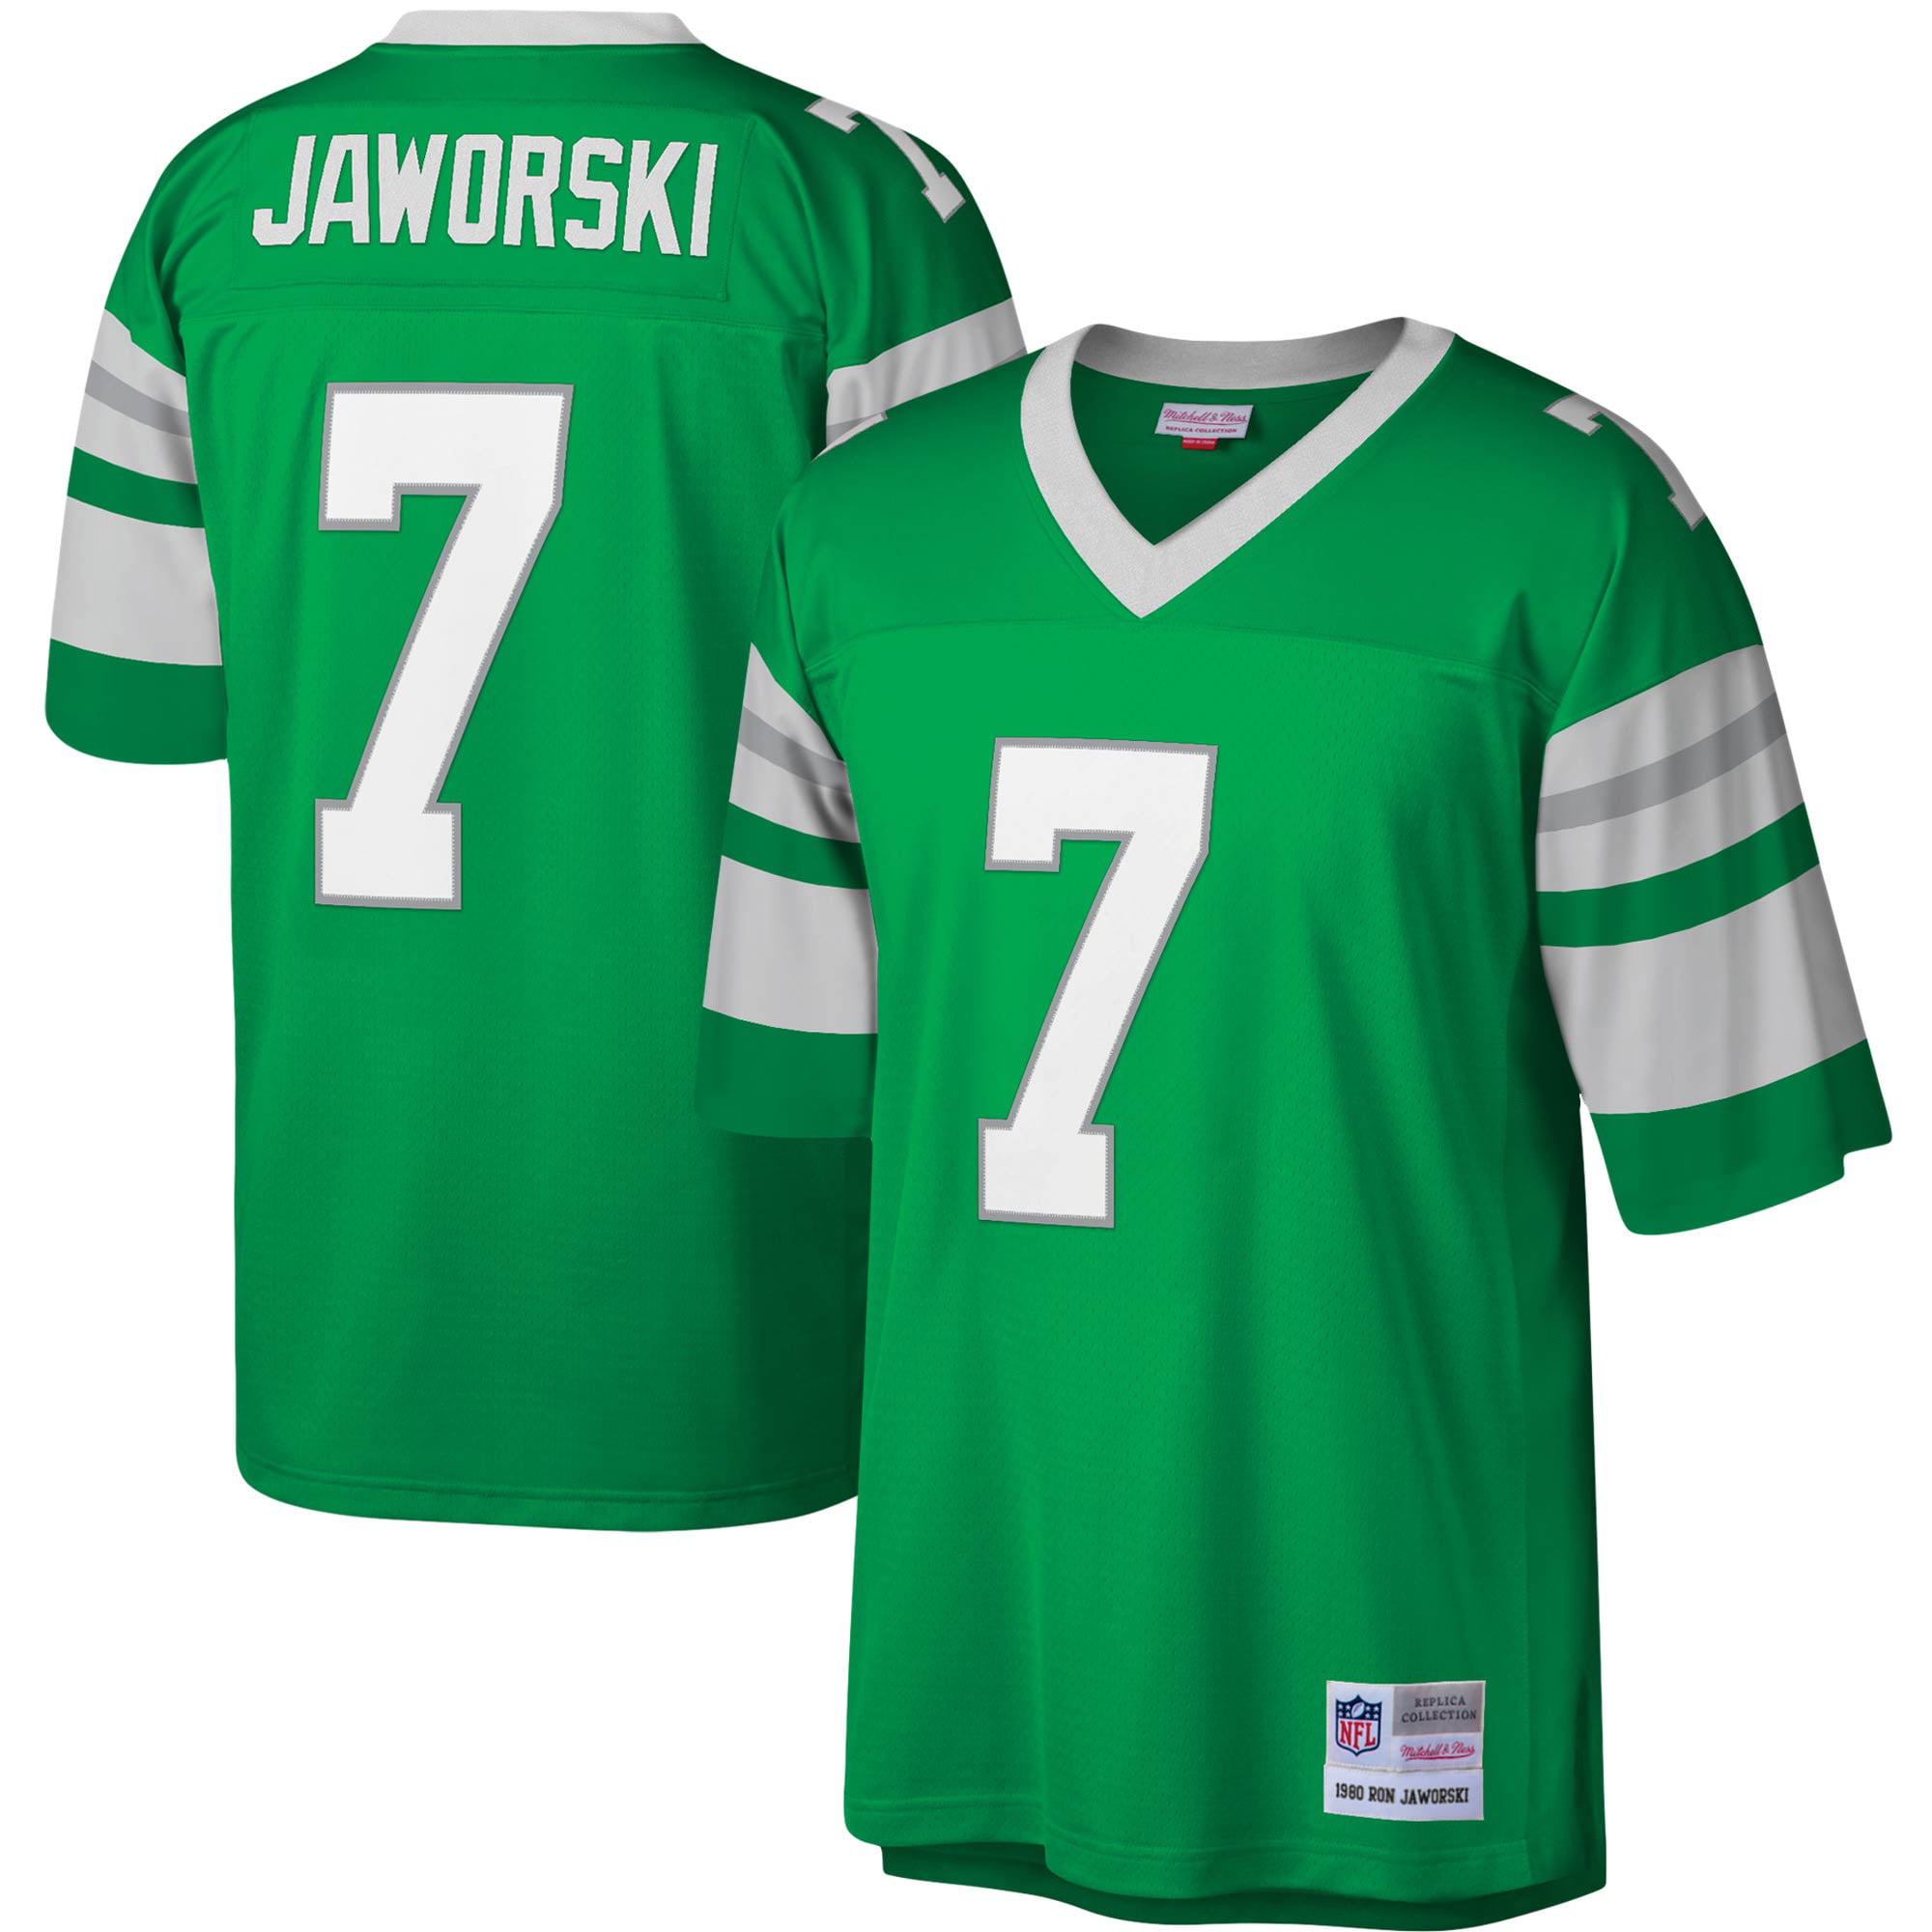 mitchell and ness eagles jersey